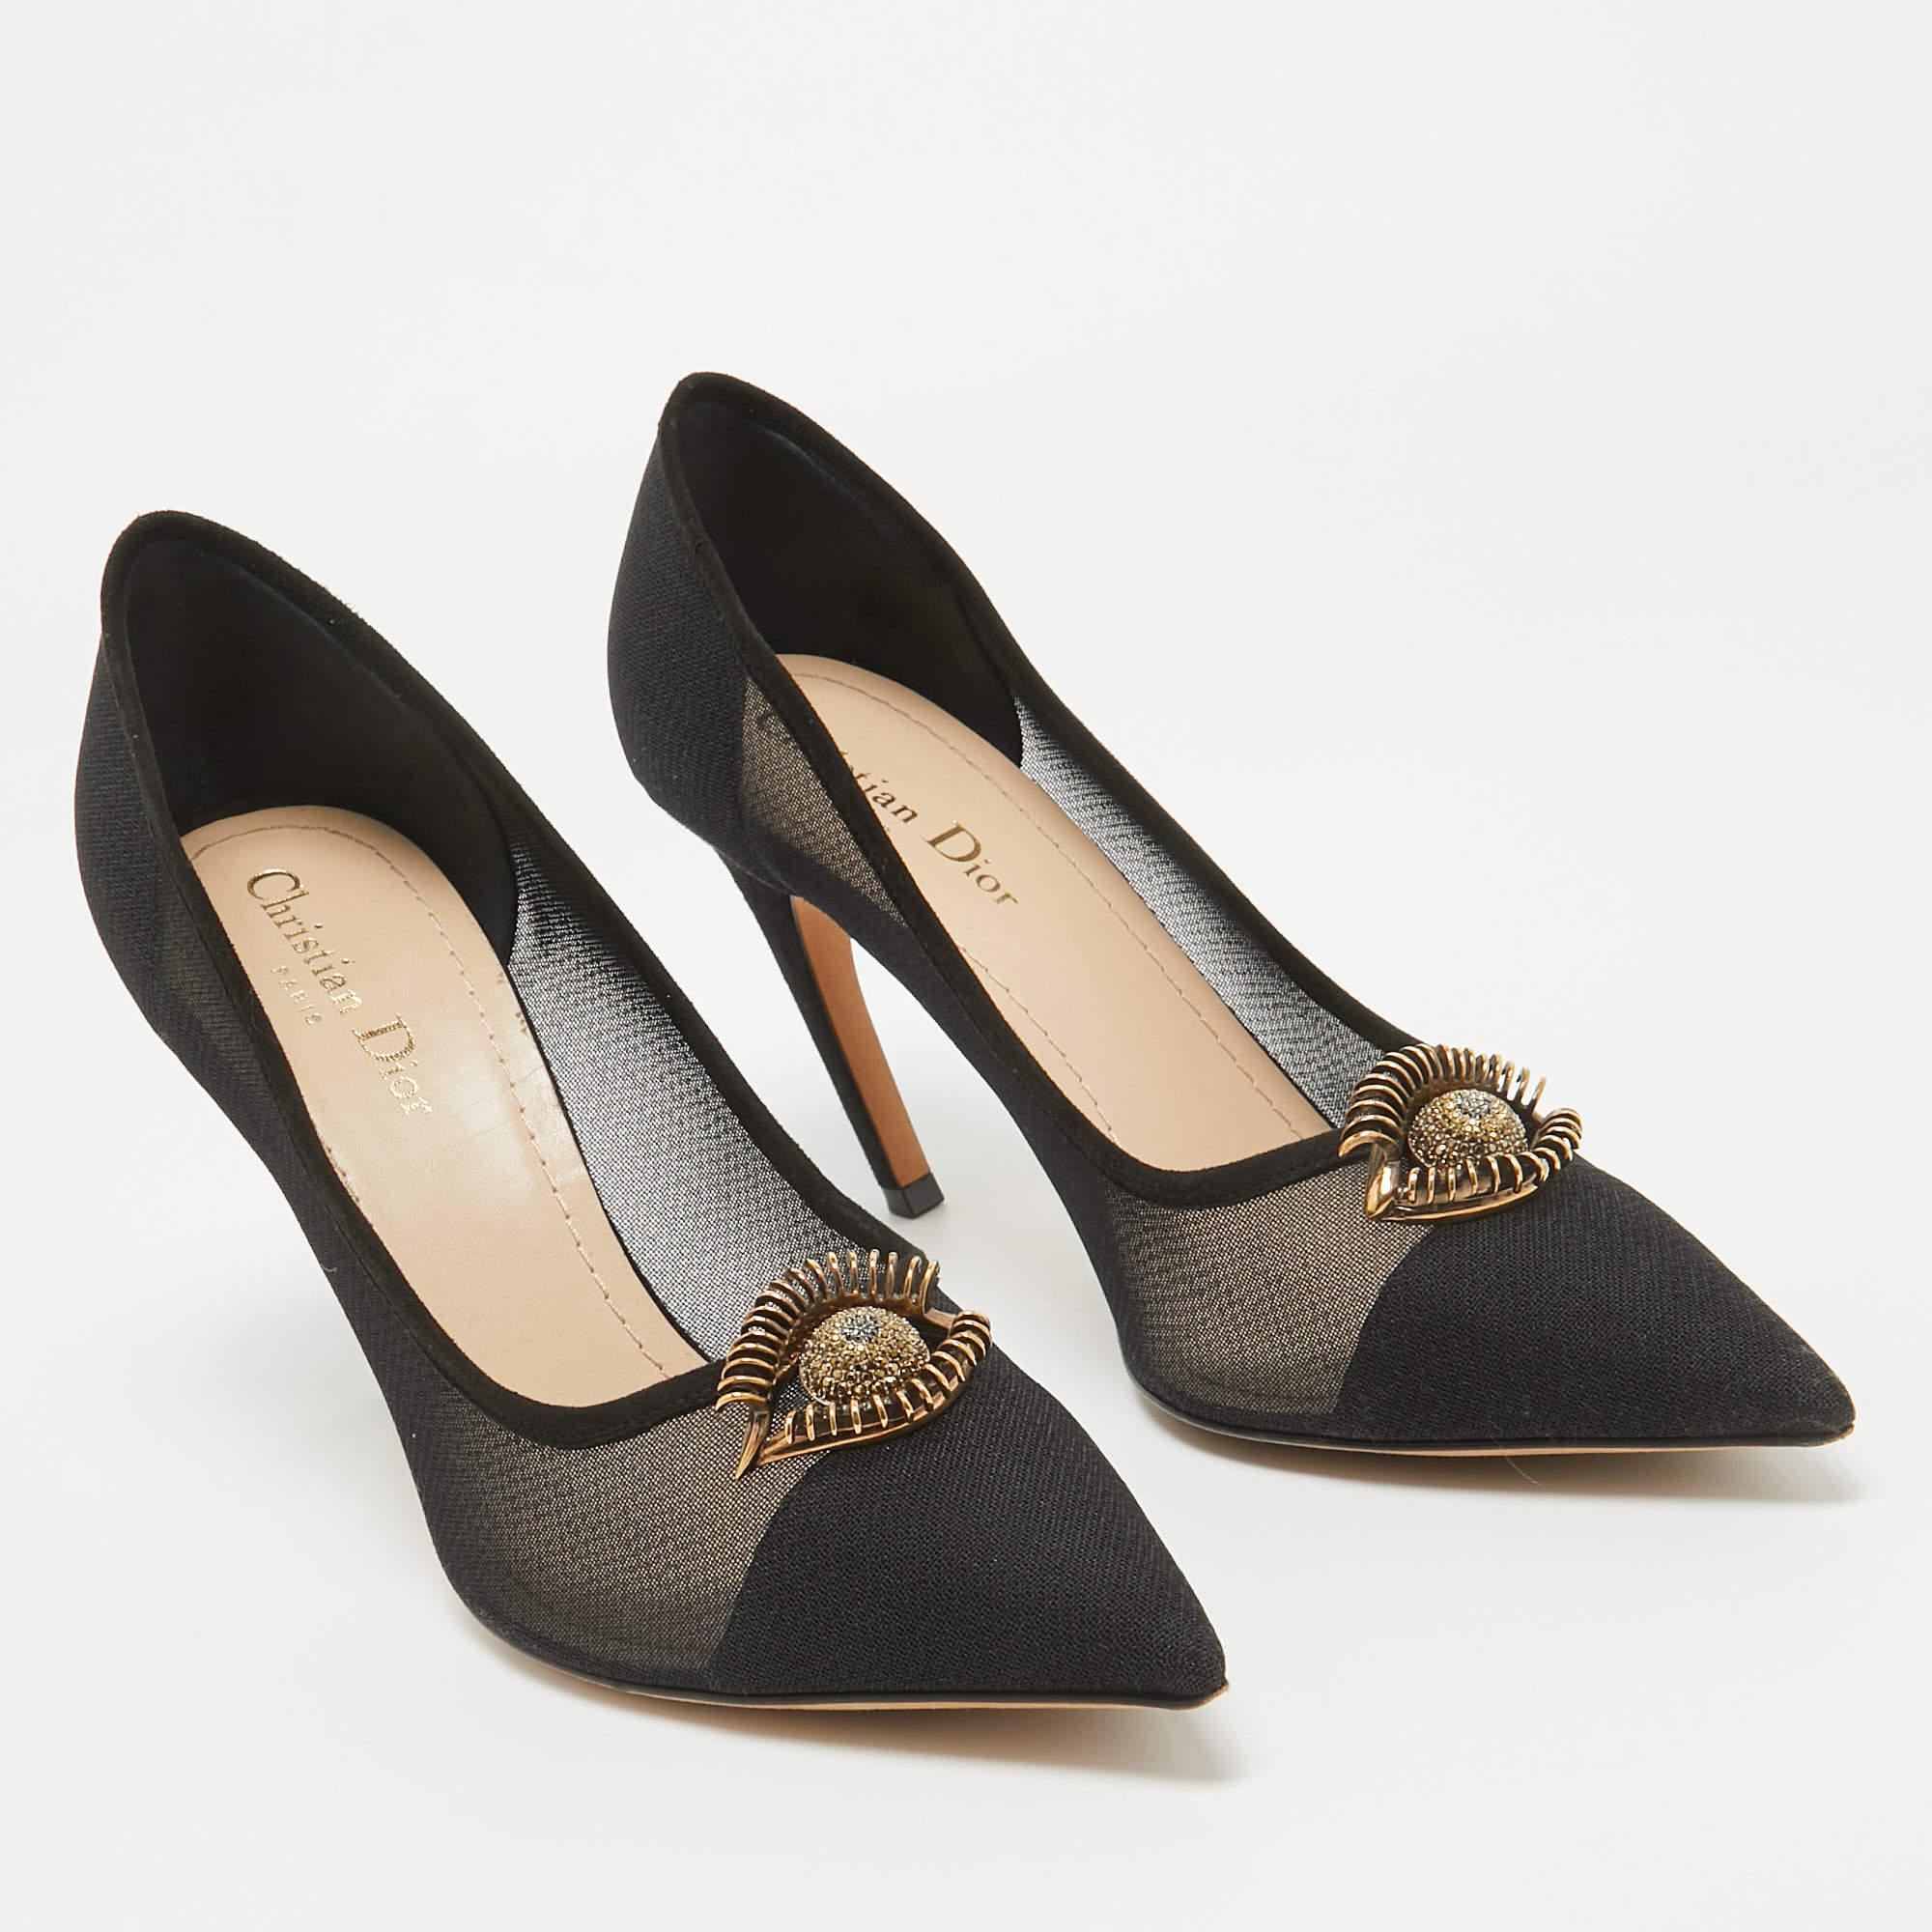 Dior Black Mesh And Suede Surreal D Eye Detail Pointed Toe Pumps Size 41 In Good Condition For Sale In Dubai, Al Qouz 2